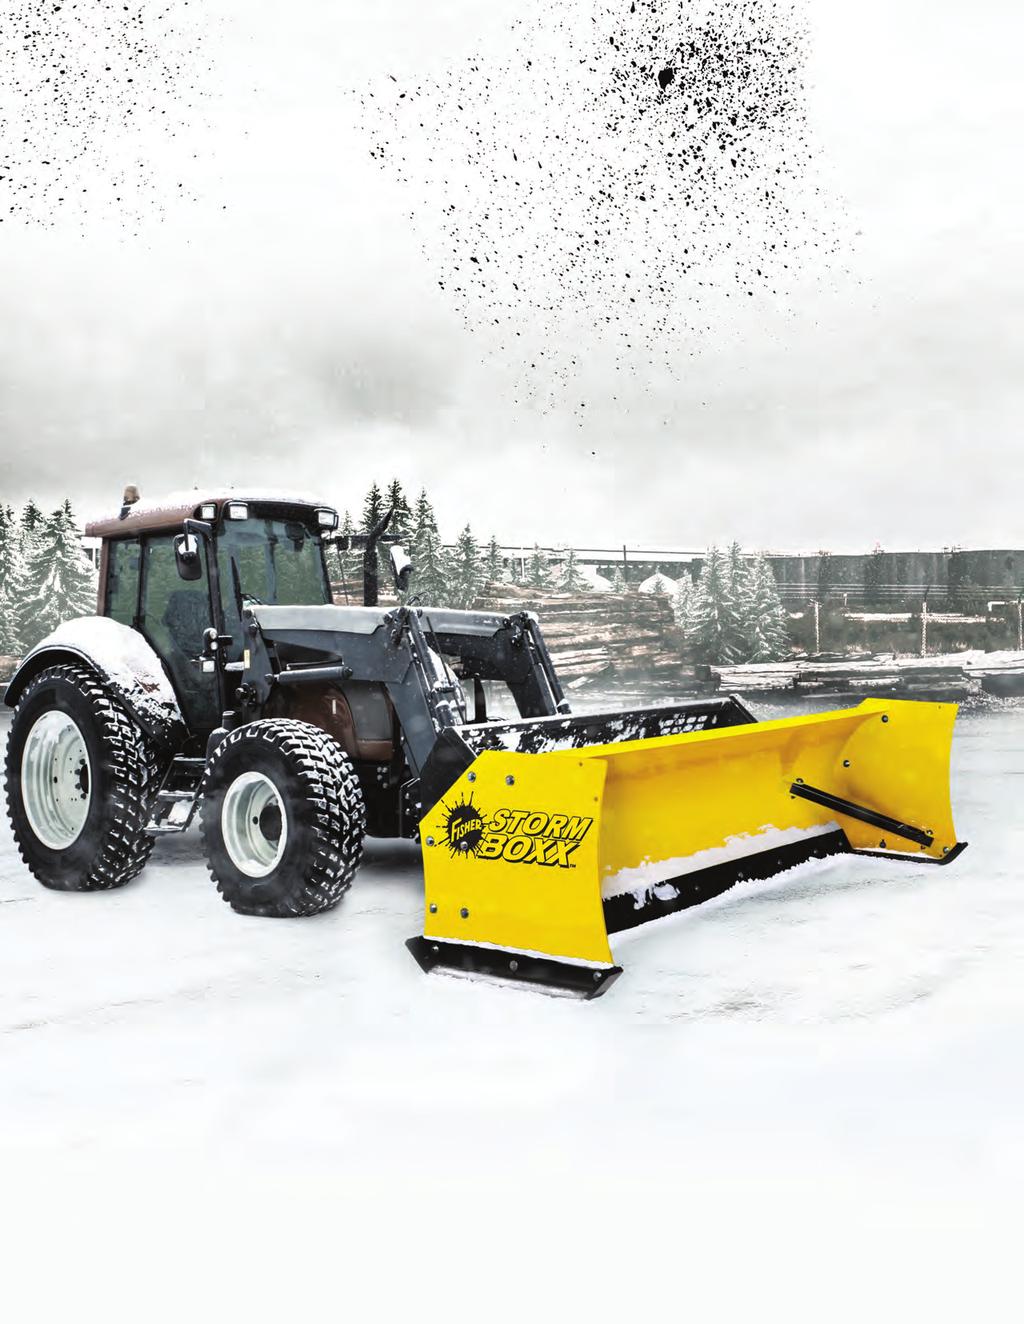 THE ALL-NEW STEEL EDGE STORM BOXX Even the biggest storms are no match for the new FISHER STORM BOXX pusher plows, designed with a steel trip-edge for clean scraping performance.